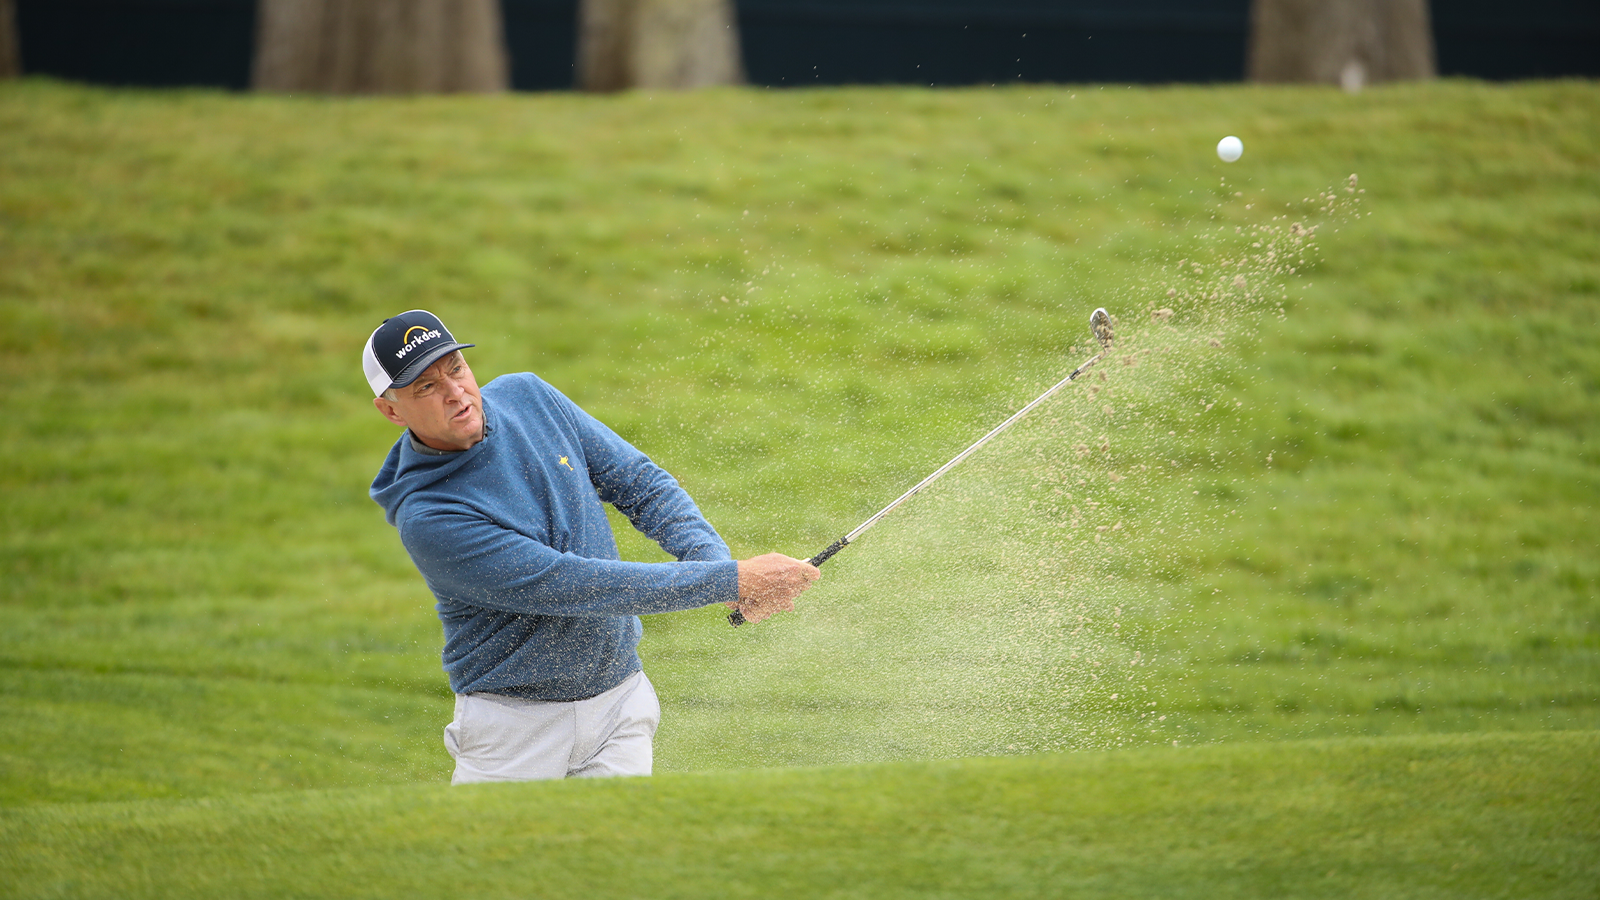  Davis Love III sports a hoodie during a practice round. (Photo by Christian Petersen/PGA of America)